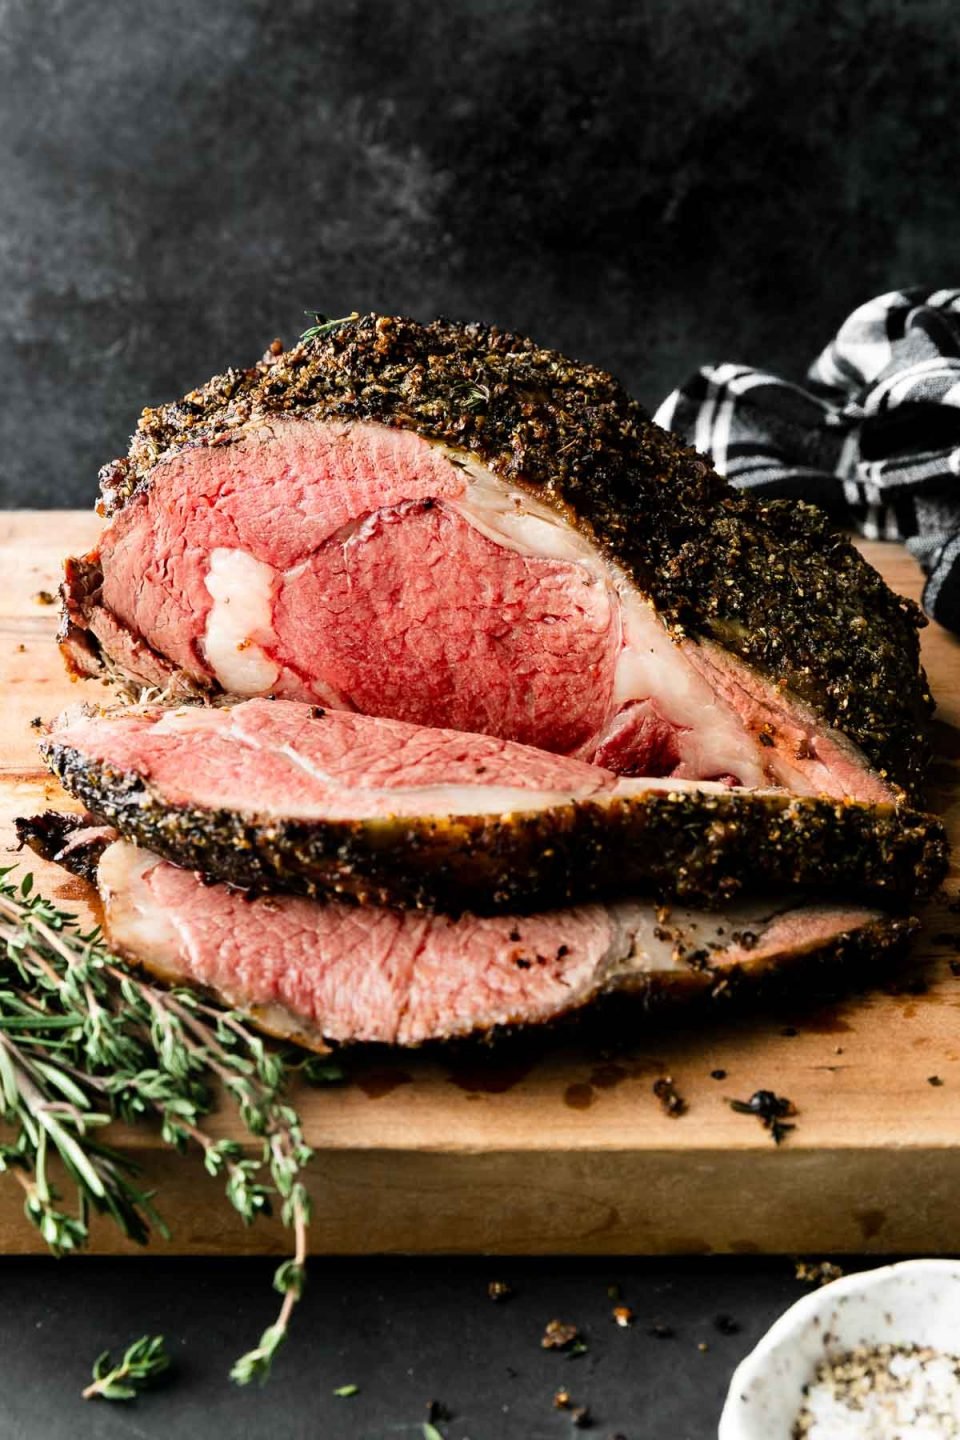 A side angle shot of roasted and partially carved medium-rare Prime Rib covered in a Garlic Herb Rub that sits atop a wooden cutting board. The cutting board rests atop a dark textured surface with a black and white plaid linen napkin resting in the background & fresh herbs, and a pinch bowl filled with kosher salt and black pepper surrounding the prime rib roast. The items are set against a dark textured background.